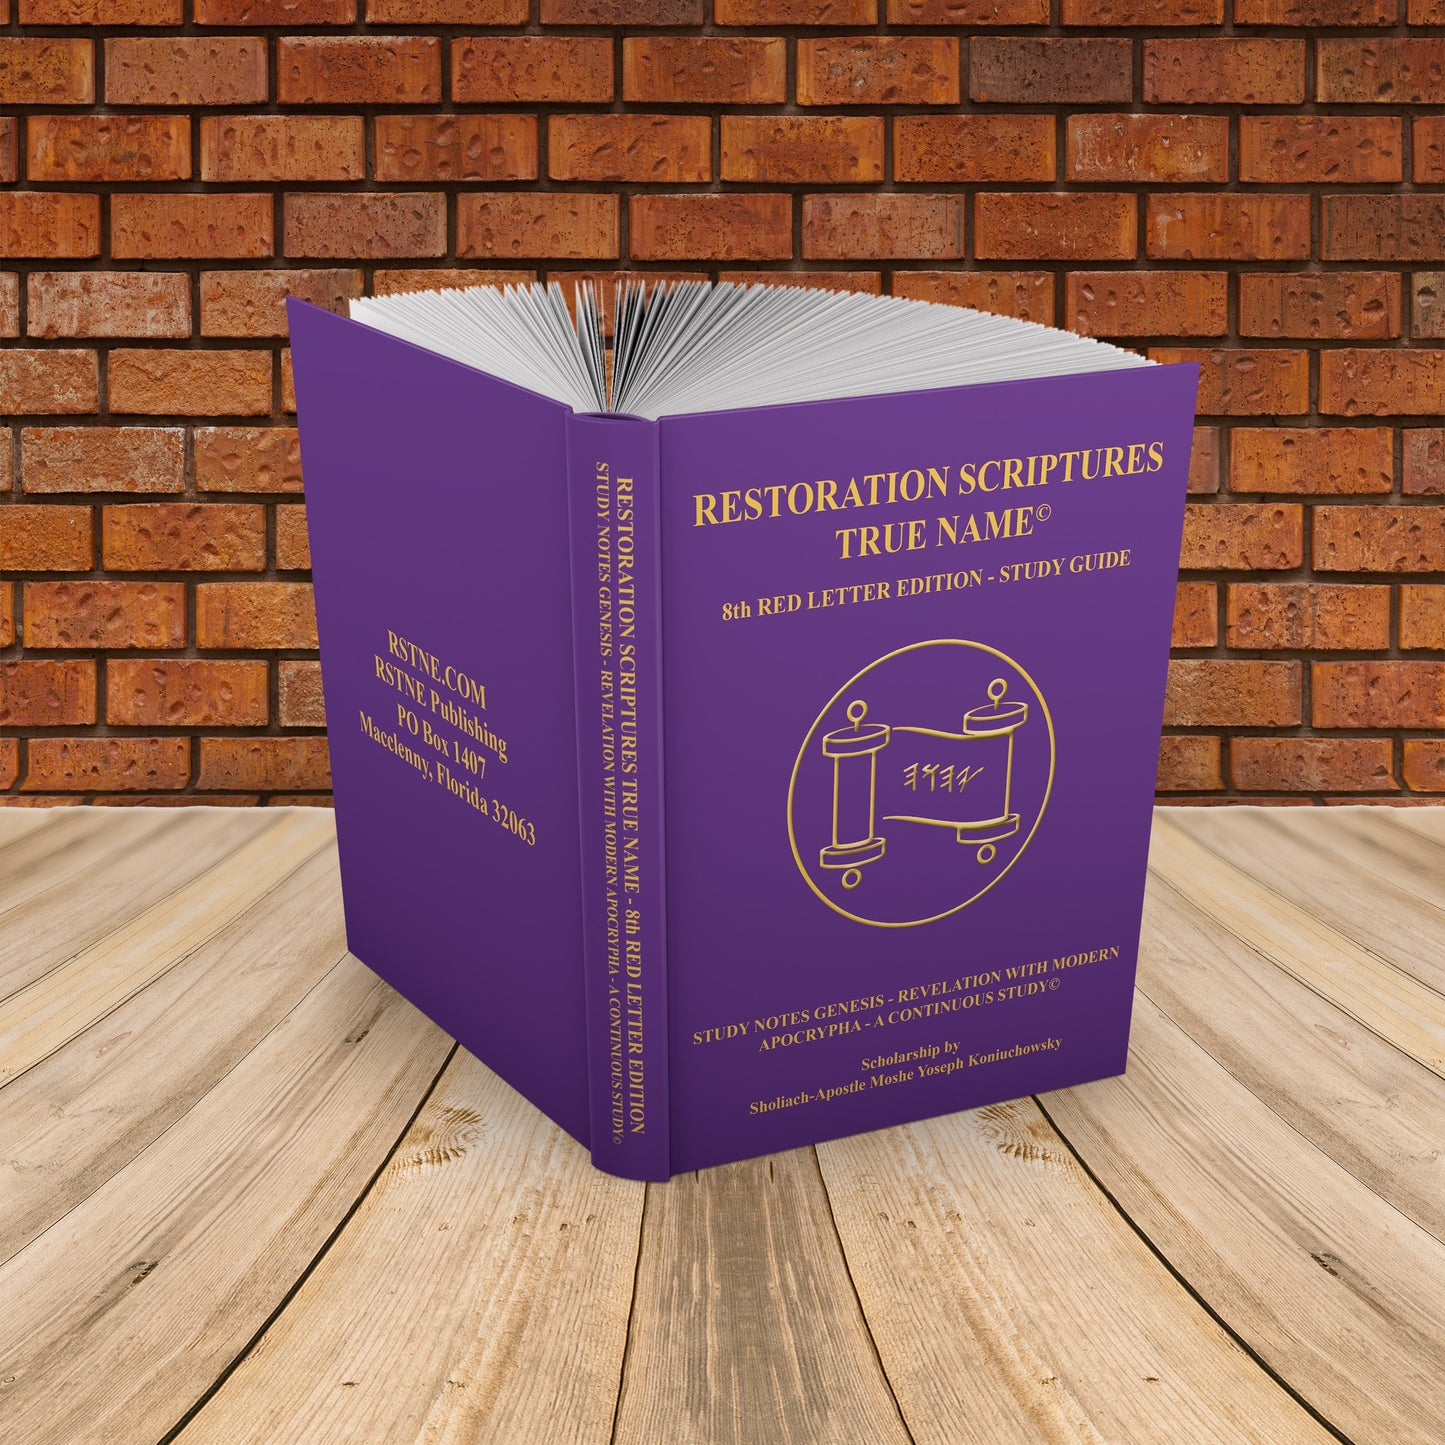 The Complete Two Pack The Restoration Scriptures True Name Eighth Larger Print Edition - Genesis-Revelation + Study Guide